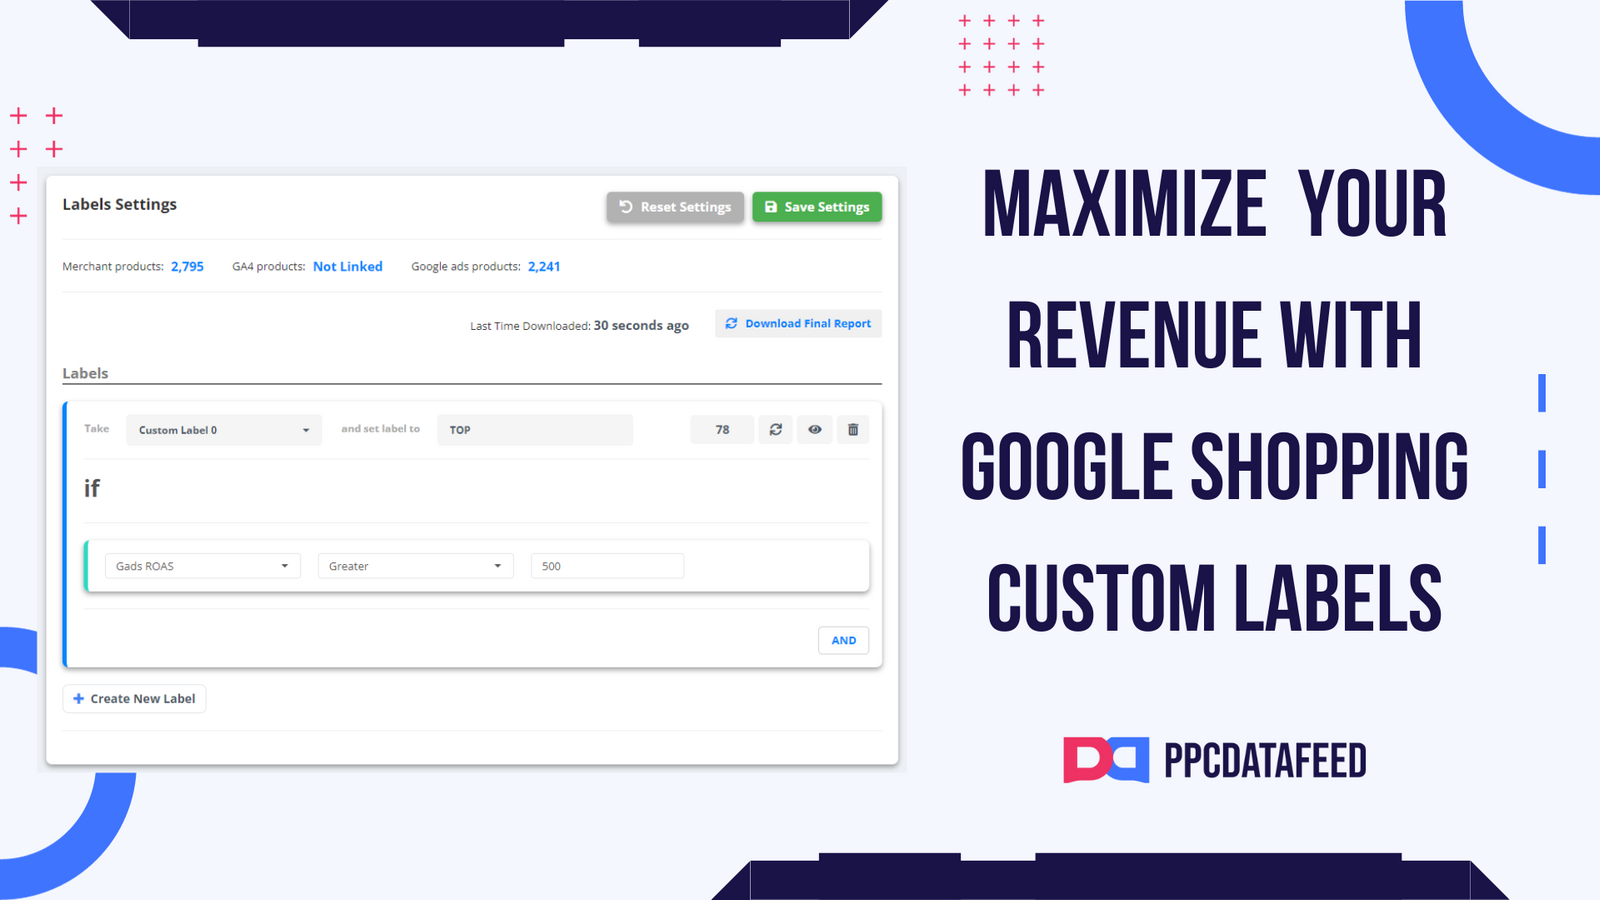 Maximize Your Revenue With Google Shopping Custom Labels